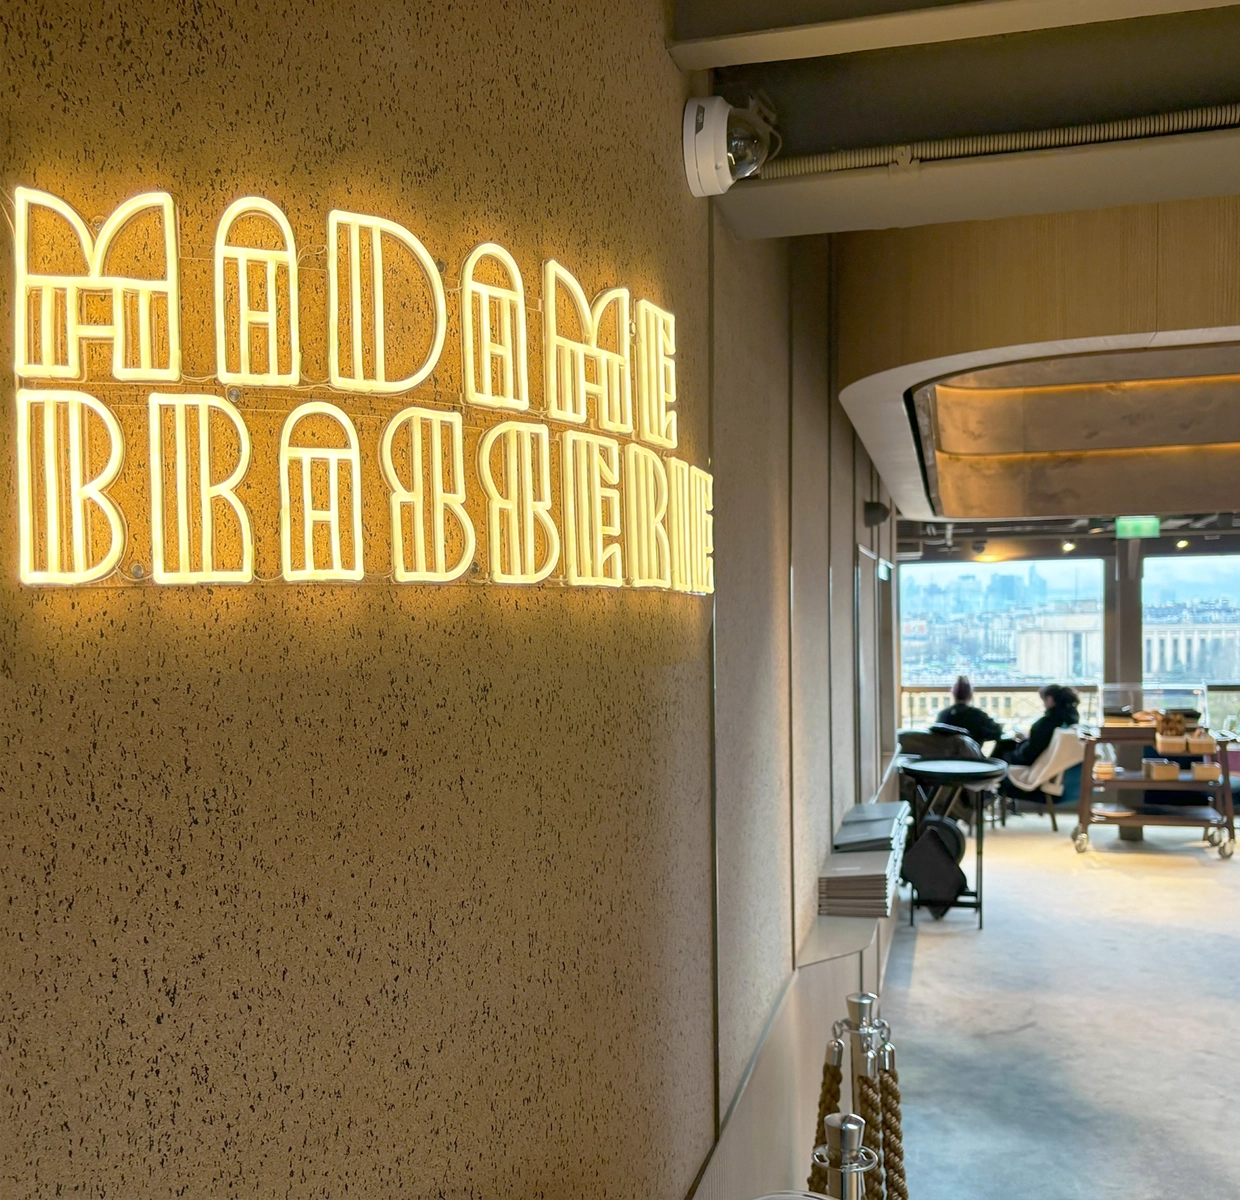 The interior of 'Madame Brasserie' lit with a warm glow, featuring a neon sign, poised to welcome guests to a premium dining and photography experience